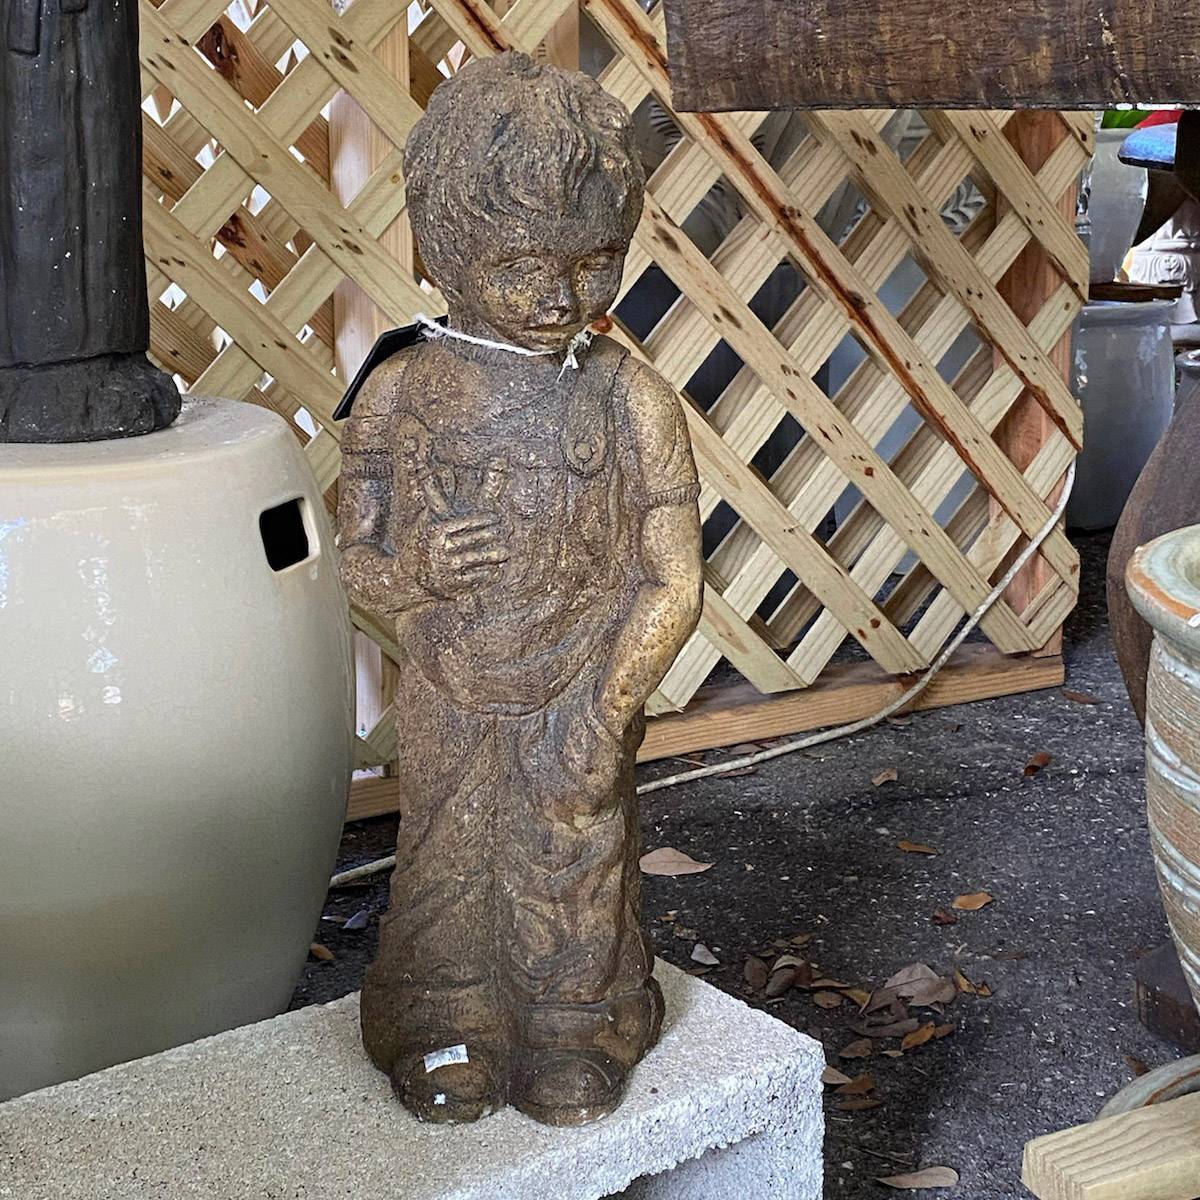 Ethans Courtyard and Patio | Children Stone Garden Sculptures | Bonita Springs | Water Fountains, Wall Fountains, Mailboxes, and more